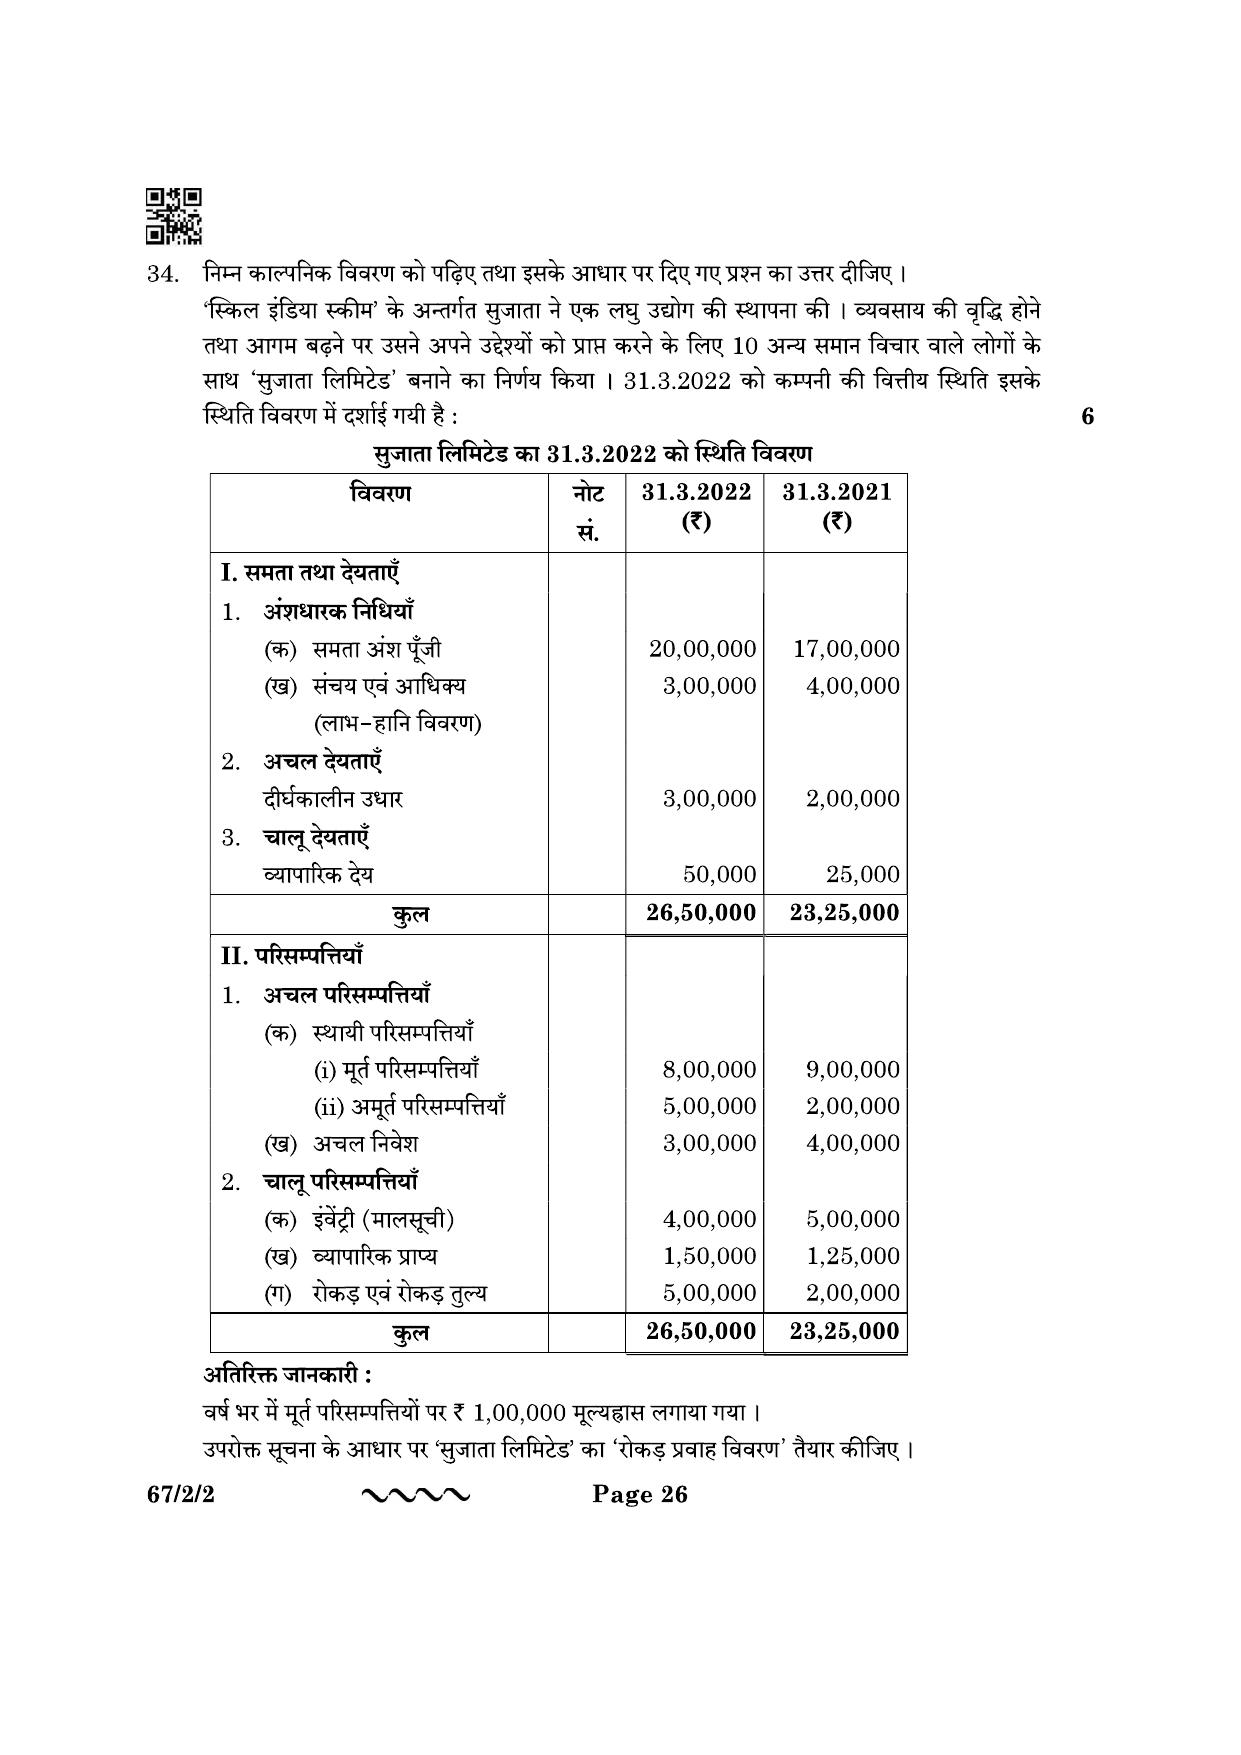 CBSE Class 12 67-2-2 Accountancy 2023 Question Paper - Page 26